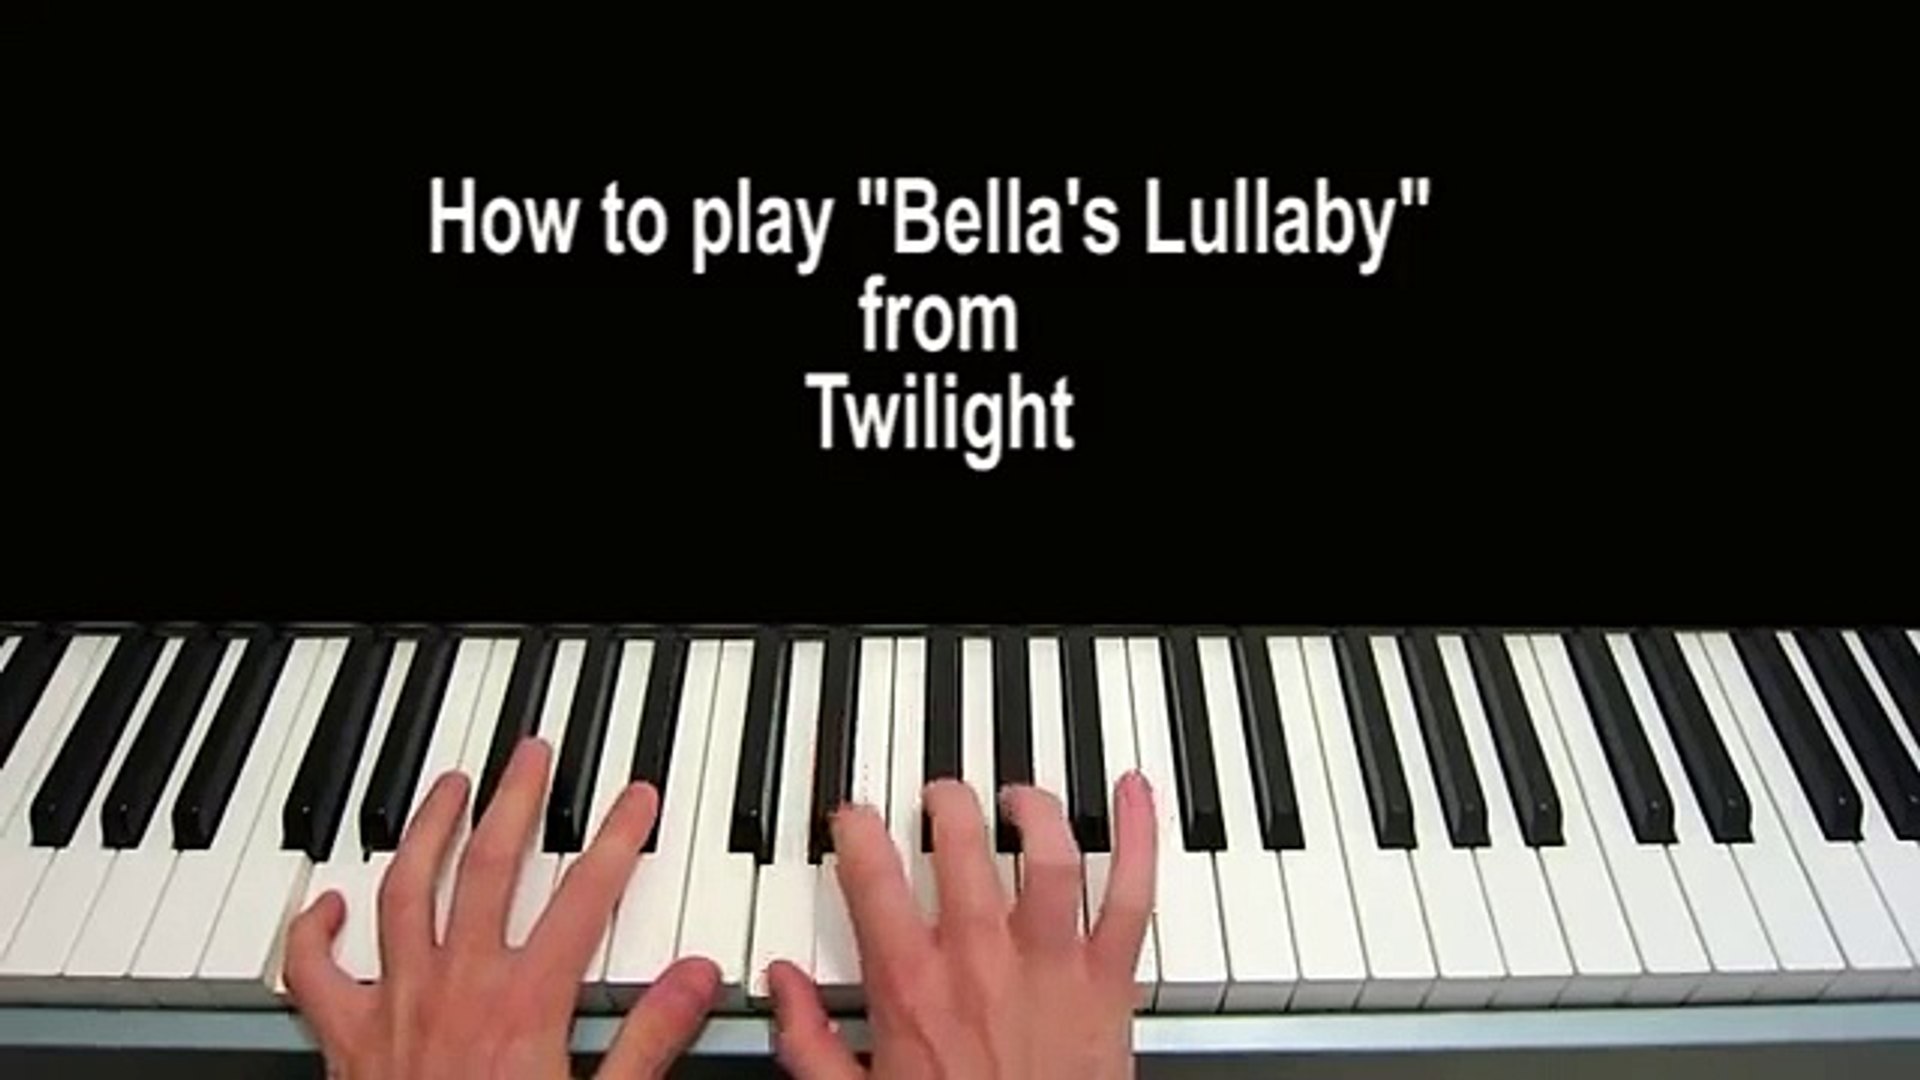 Bella's Lullaby Piano Tutorial Carter Burwell - Twilight - video Dailymotion